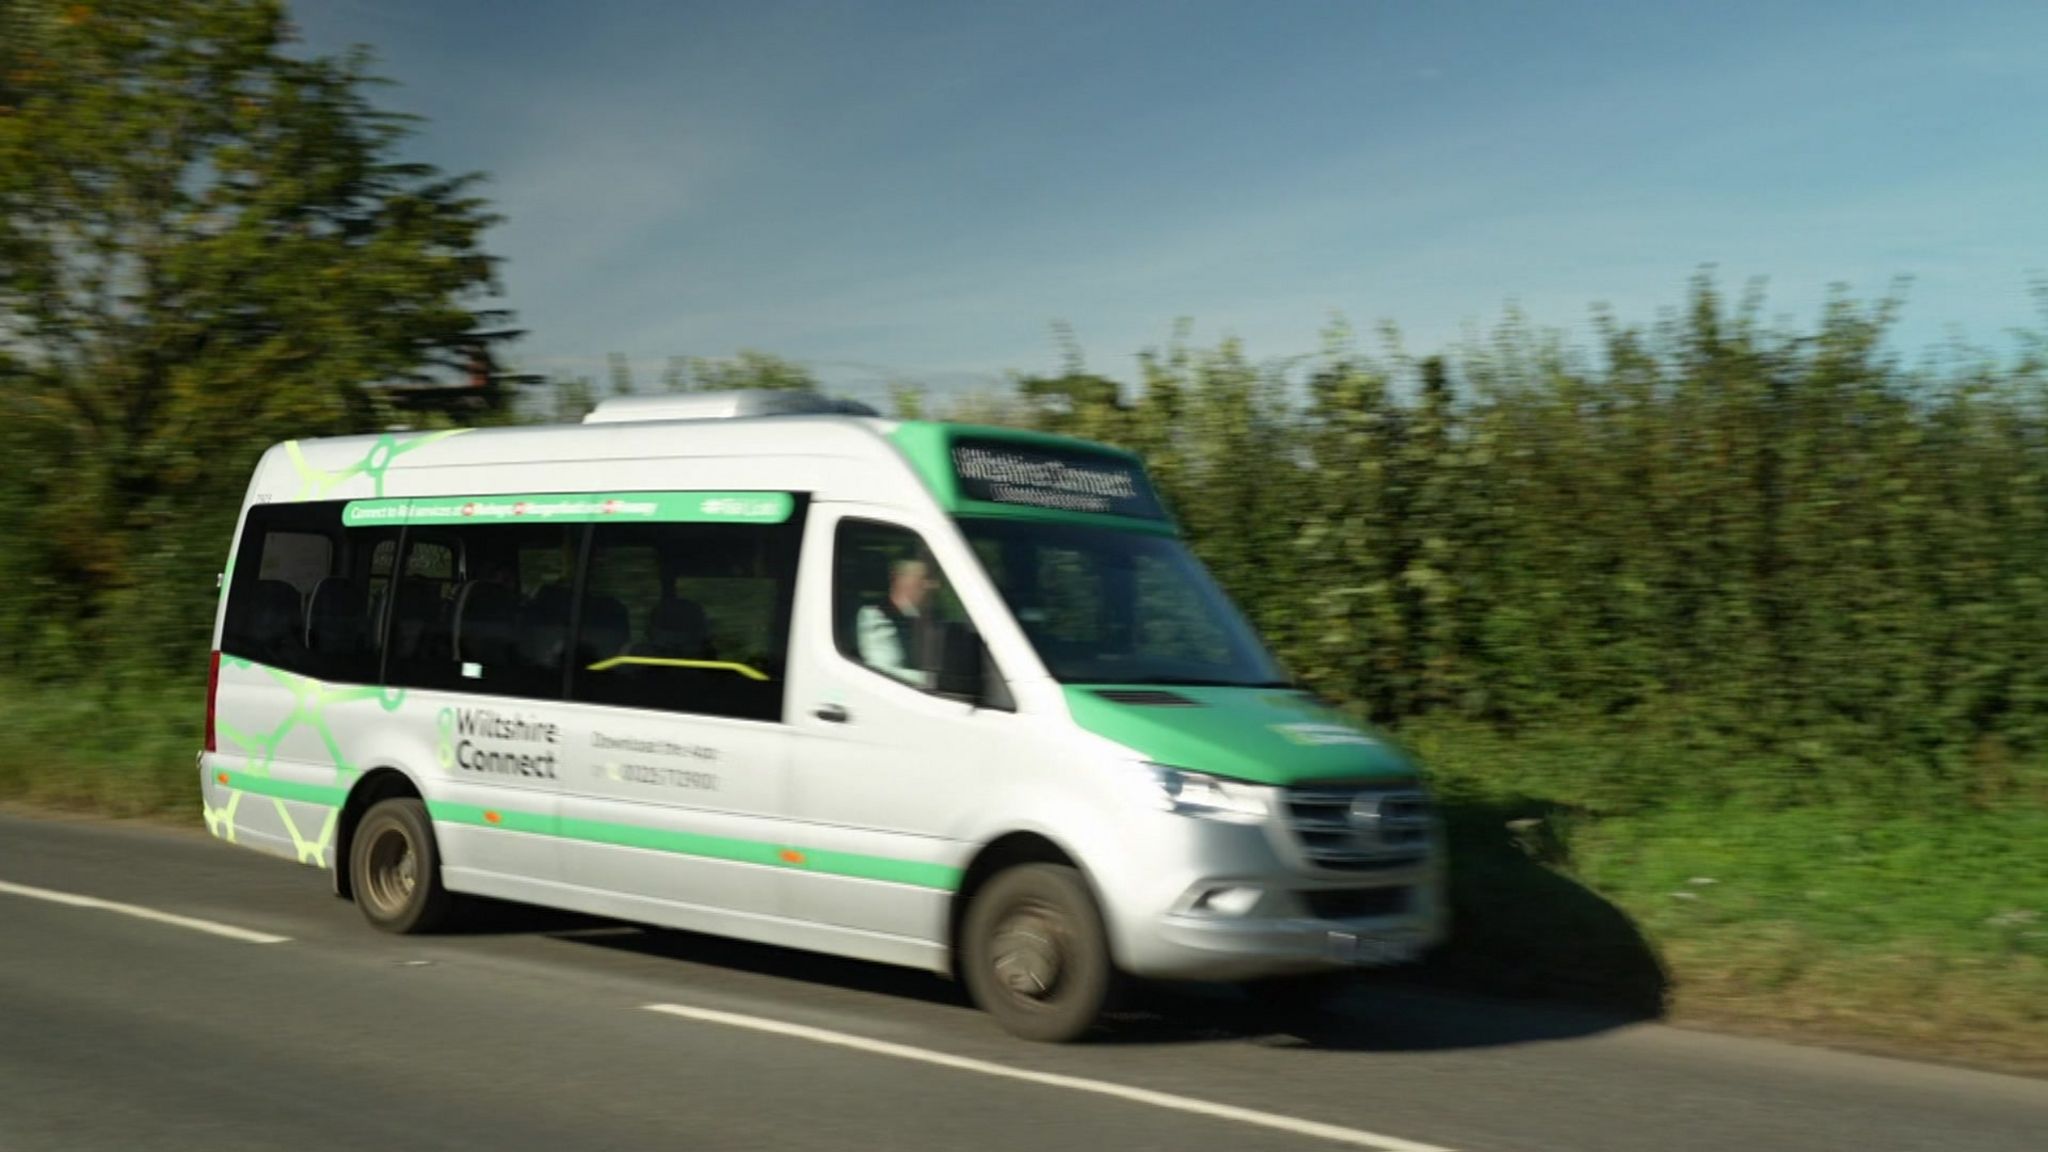 Wiltshire Connect bookable service